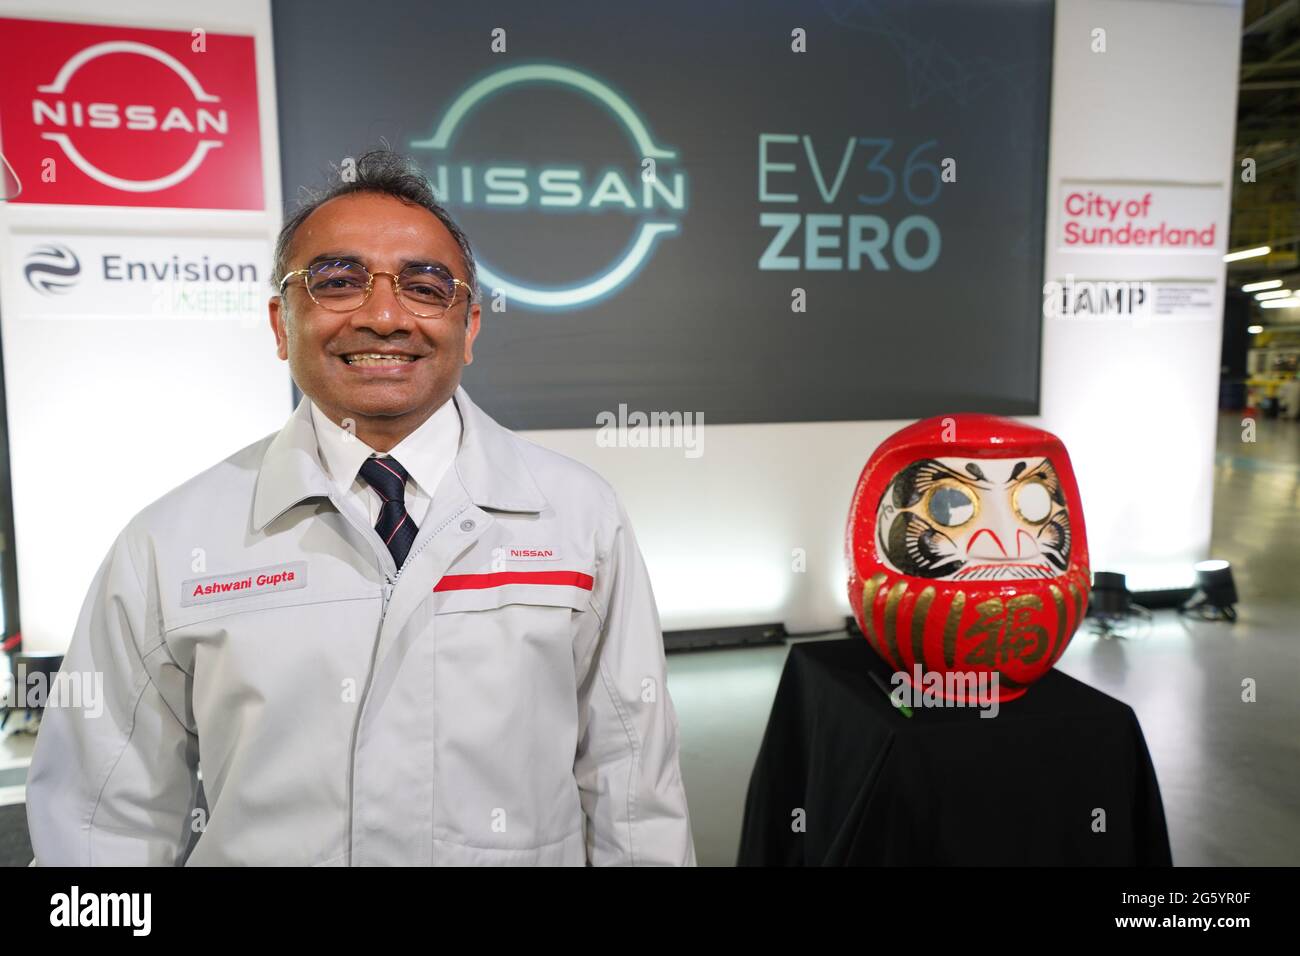 Nissan's Chief Operating Officer Ashwani Gupta stands next to a Daruma, a hollow, round, Japanese traditional doll regarded as a talisman of good luck, after announcing that the Japanese car giant is to build a new electric model and huge battery plant in the UK in a massive boost to the automotive industry. Picture date: Thursday July 1, 2021. More than 1,600 jobs will be created in Sunderland and an estimated 4,500 in supply companies under an investment of £1 billion. Stock Photo